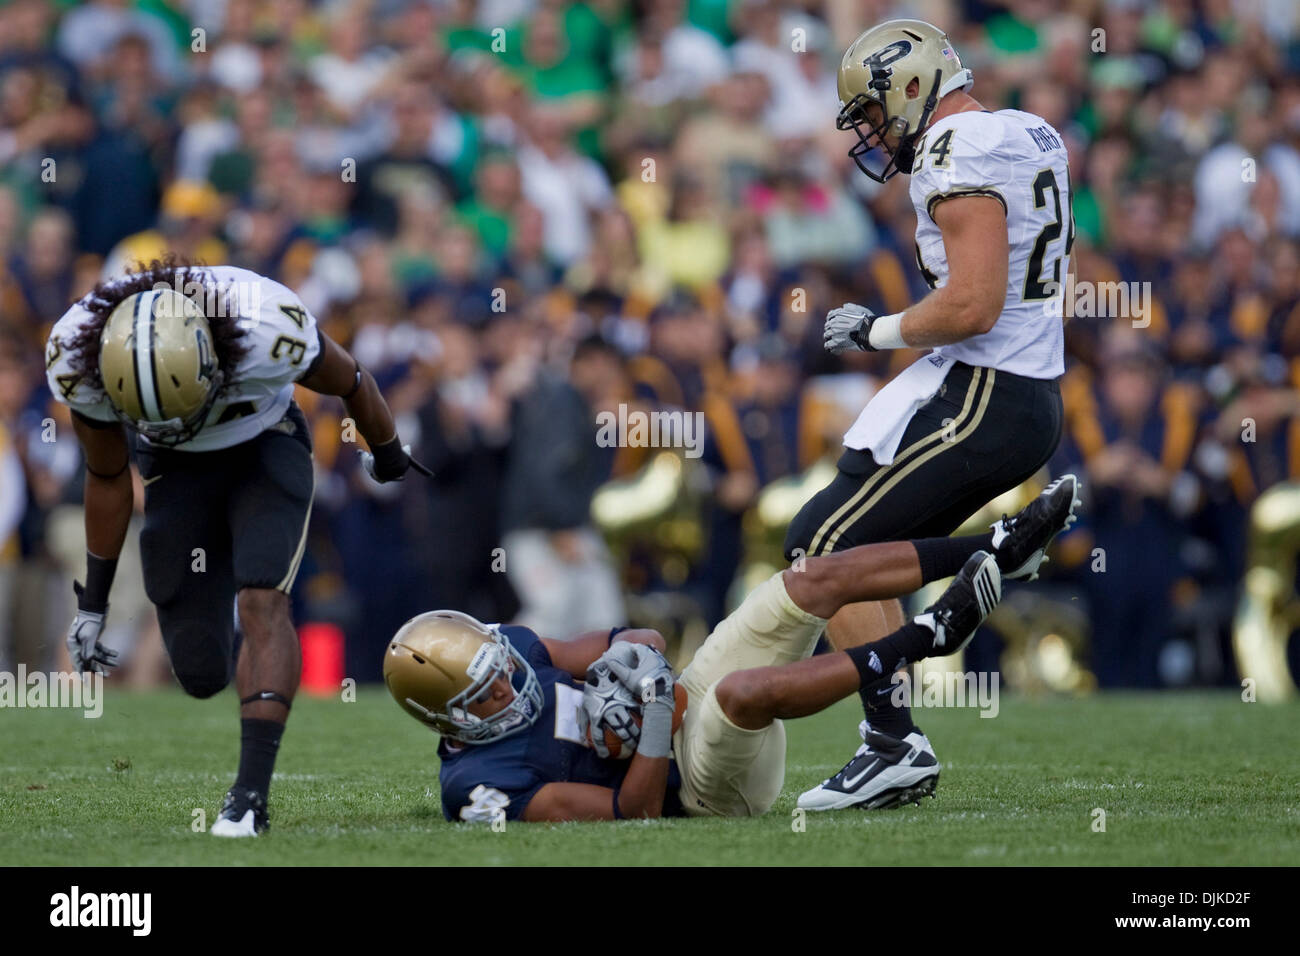 Sep. 04, 2010 - South Bend, Indiana, United States of America - Notre Dame wide receiver TJ Jones (#7) gets hit after reception by Purdue defensive back Jason Werneri (#24) in game action during NCAA football game between the Notre Dame Fighting Irish and the Purdue Boilermakers.  Notre Dame defeated Purdue 23-12 in game at Notre Dame Stadium in South Bend, Indiana. (Credit Image:  Stock Photo